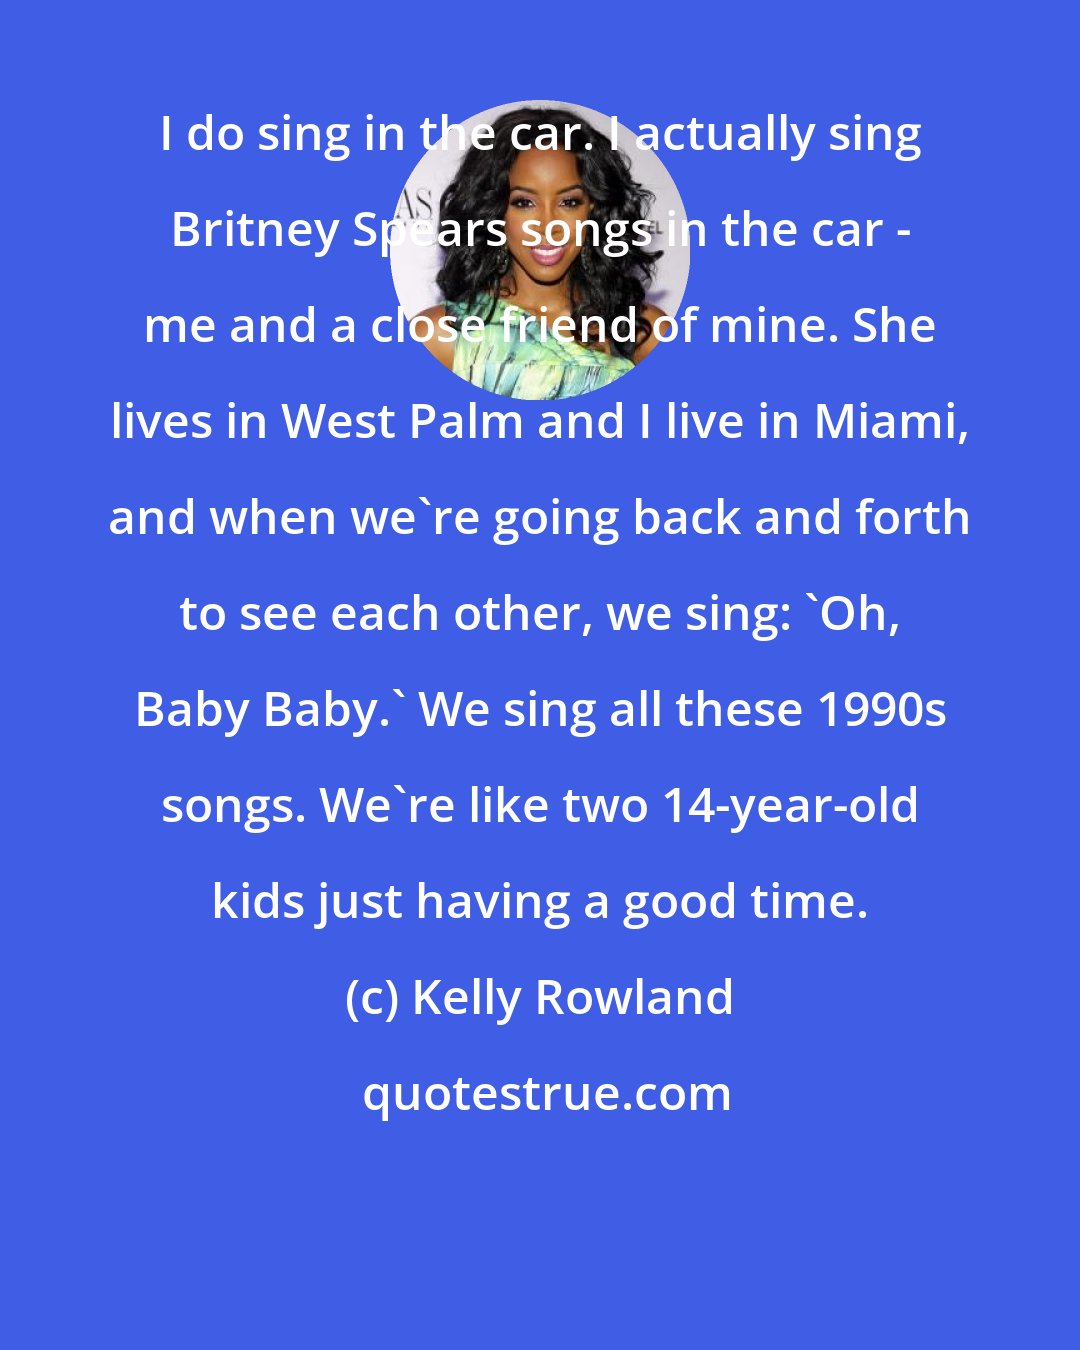 Kelly Rowland: I do sing in the car. I actually sing Britney Spears songs in the car - me and a close friend of mine. She lives in West Palm and I live in Miami, and when we're going back and forth to see each other, we sing: 'Oh, Baby Baby.' We sing all these 1990s songs. We're like two 14-year-old kids just having a good time.